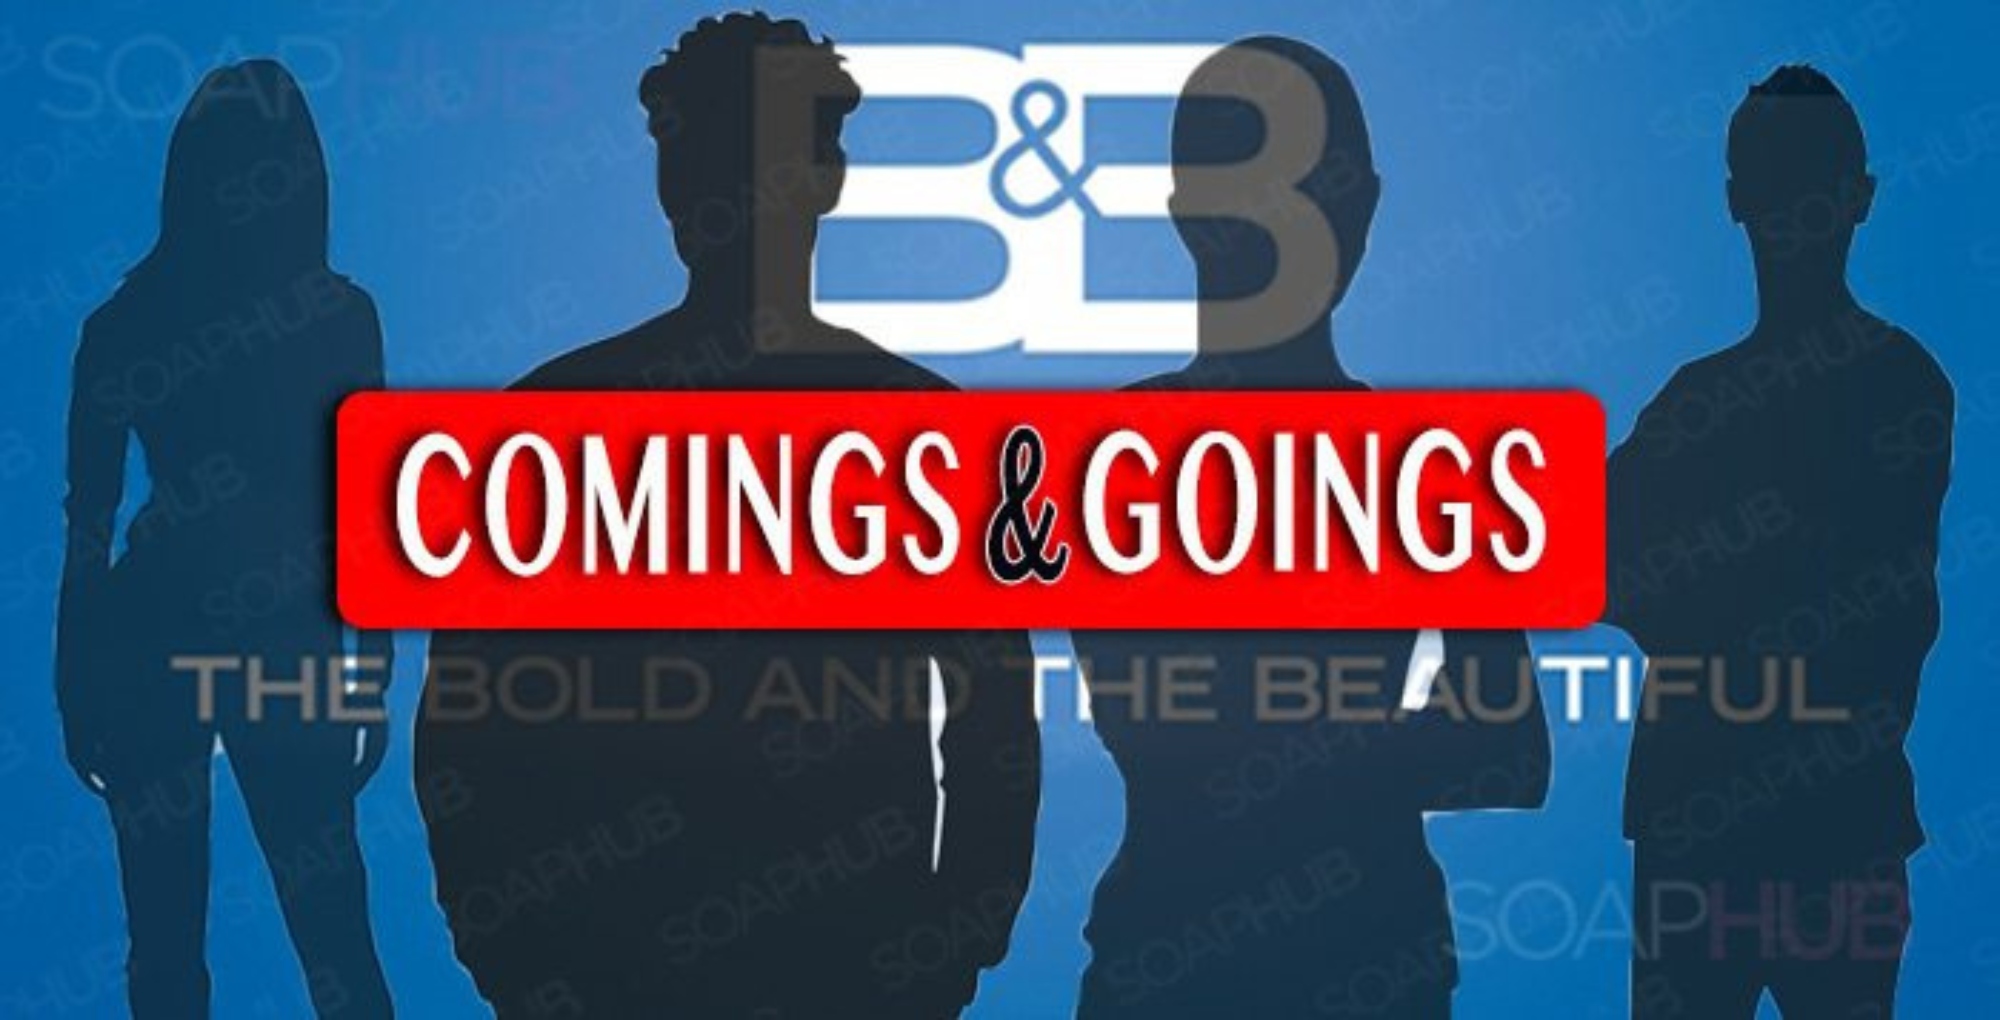 The Bold and the Beautiful Comings And Goings logo graphic